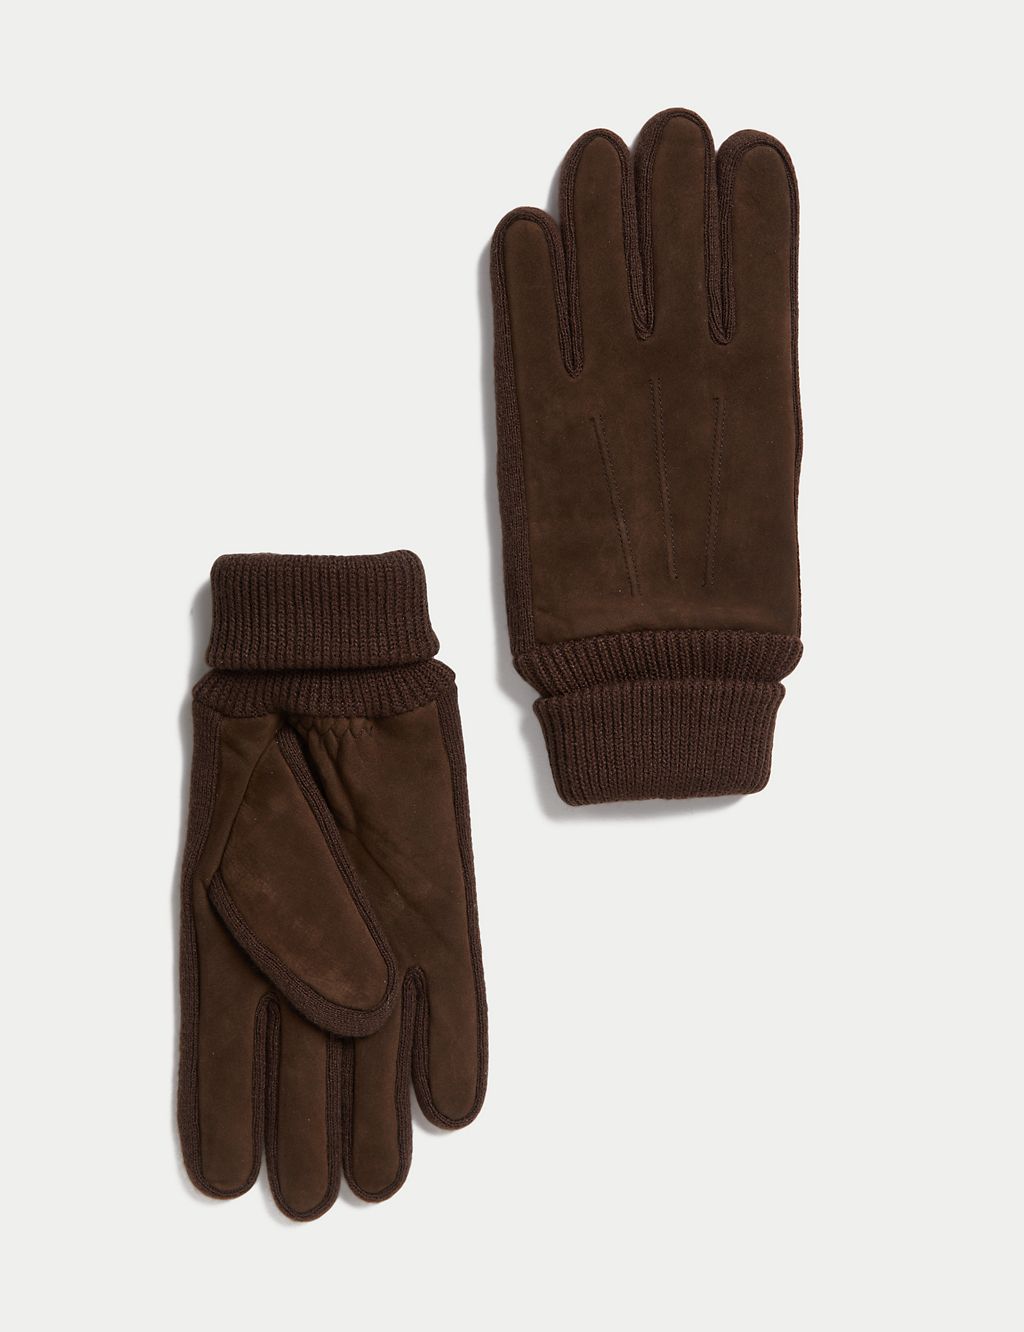 Nubuck Leather Gloves 1 of 1